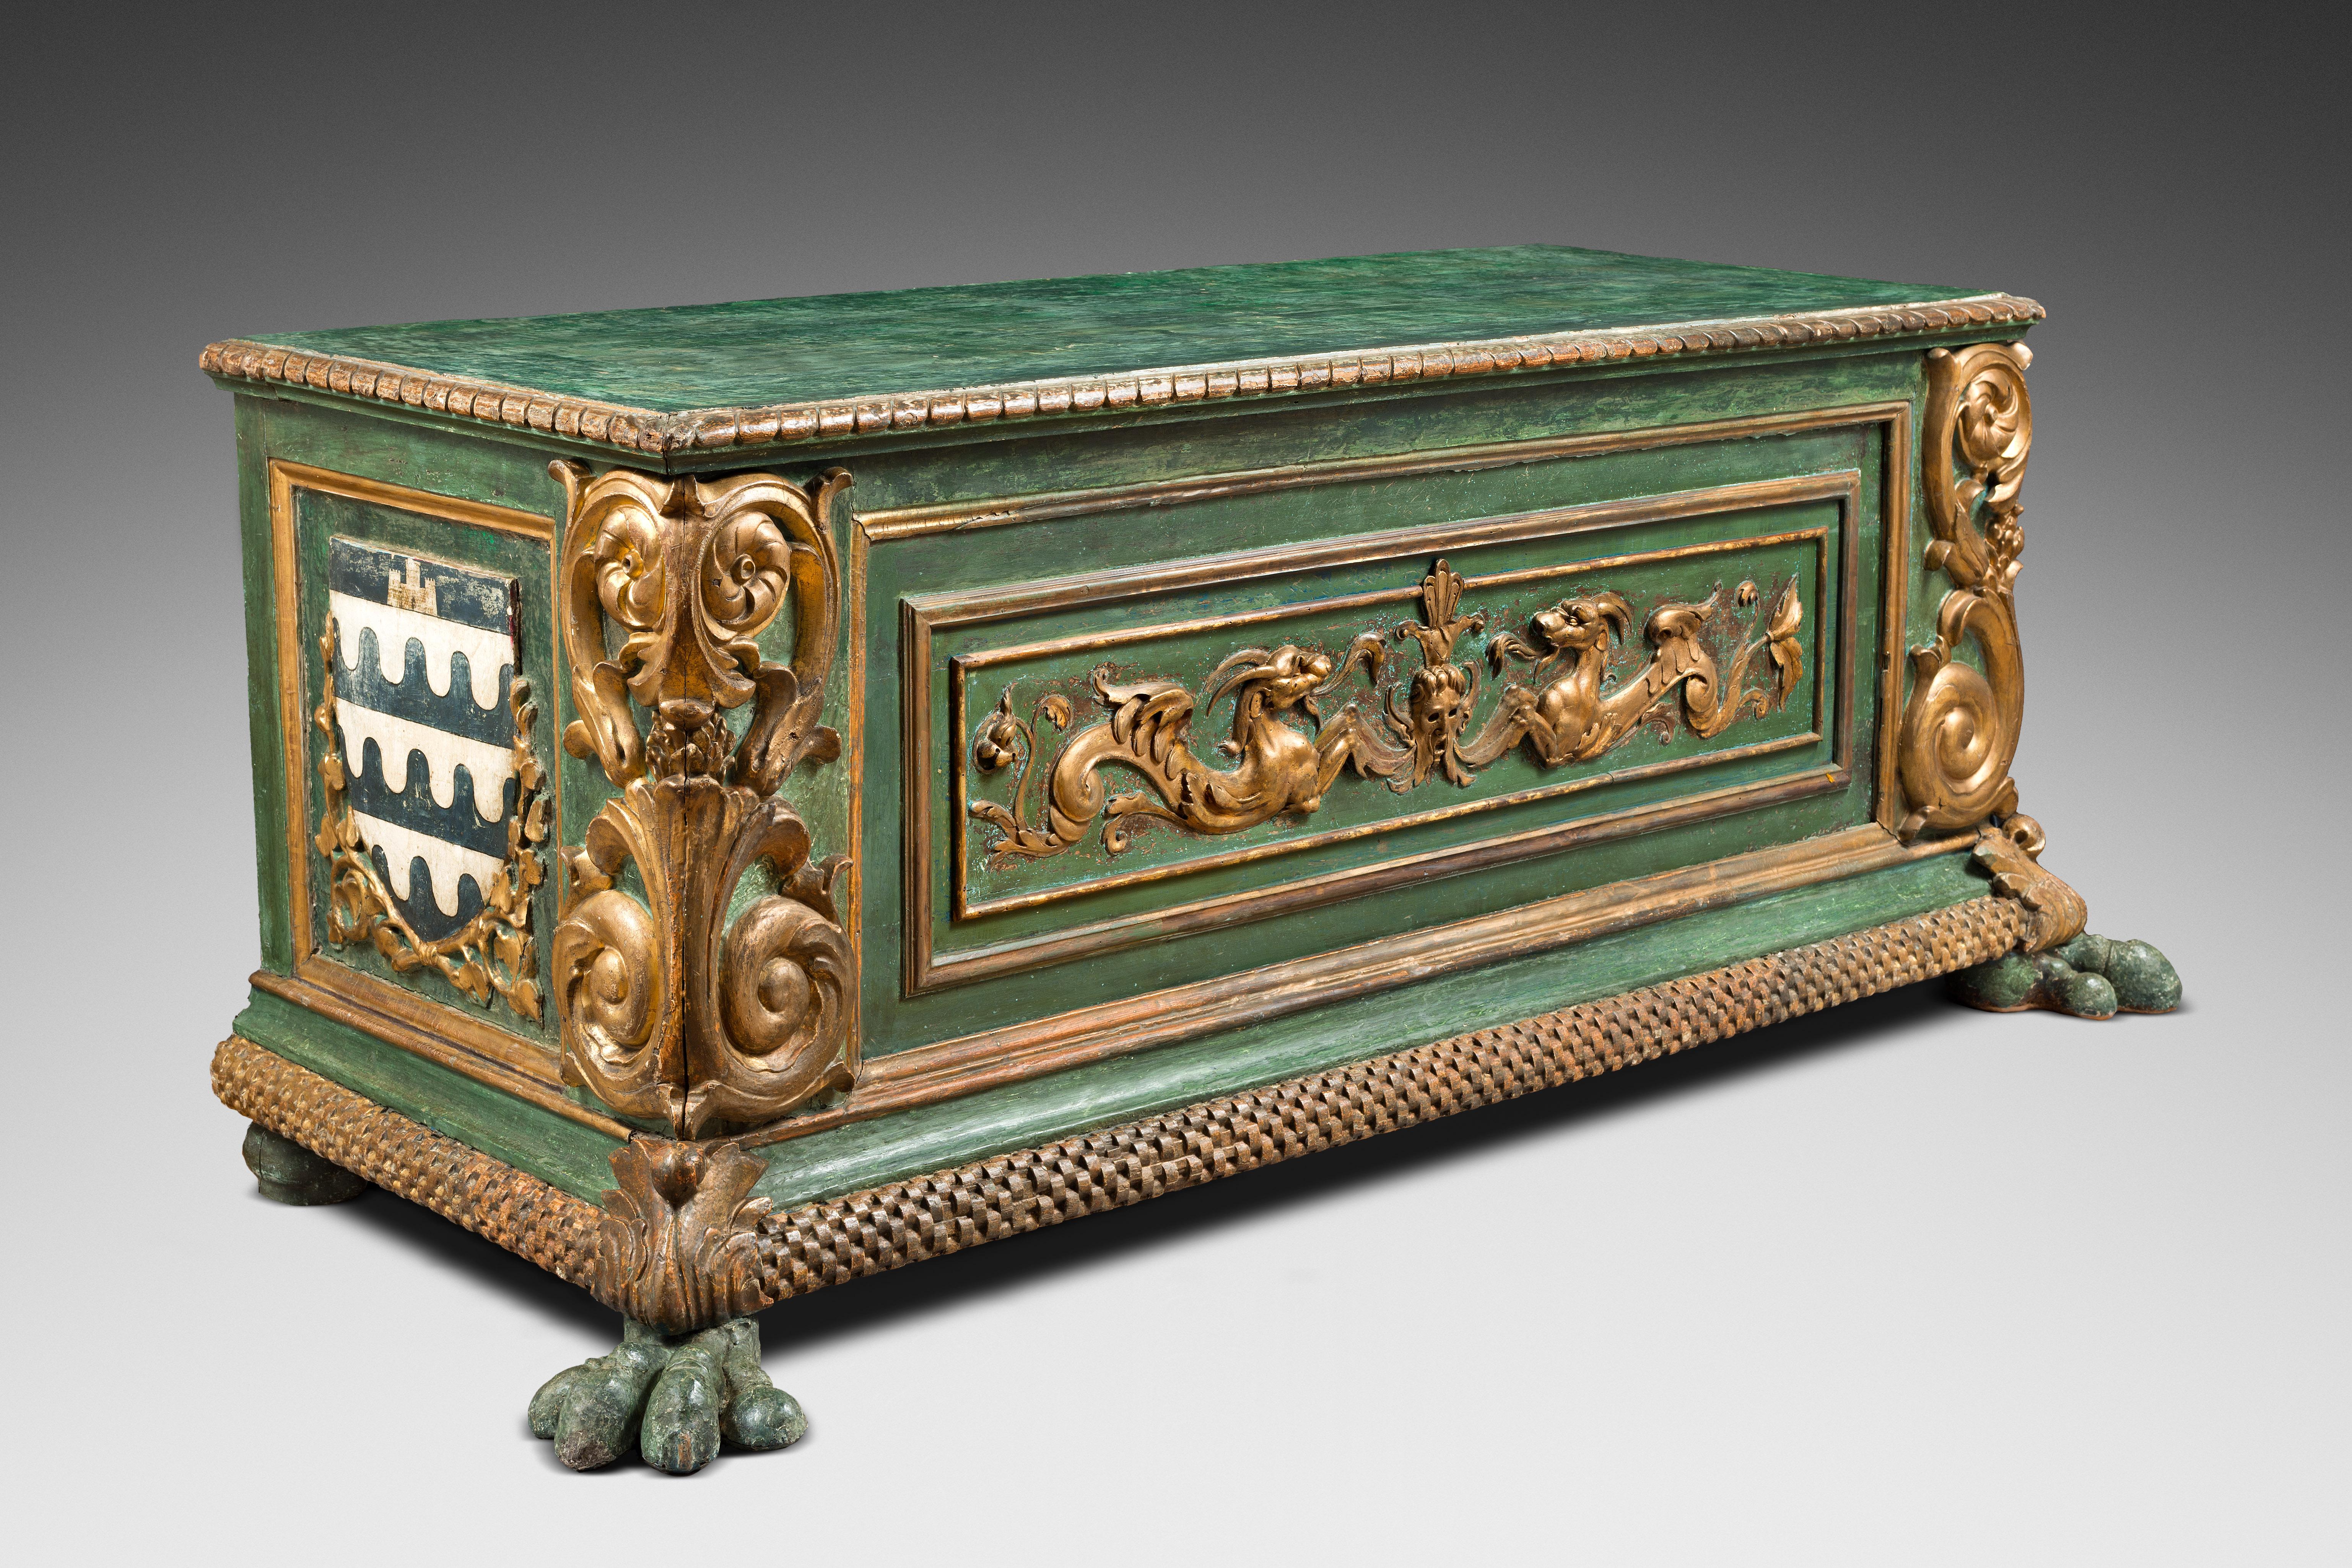 Important Italian Renaissance Polychrome chest with coat-of-arms

Origin: Italy
Period: early 16th century

Height: 71cm
Length: 190cm
Depth: 78cm

Polychrome wood
Partly original

This large and strong chest stands on two vigorous lion